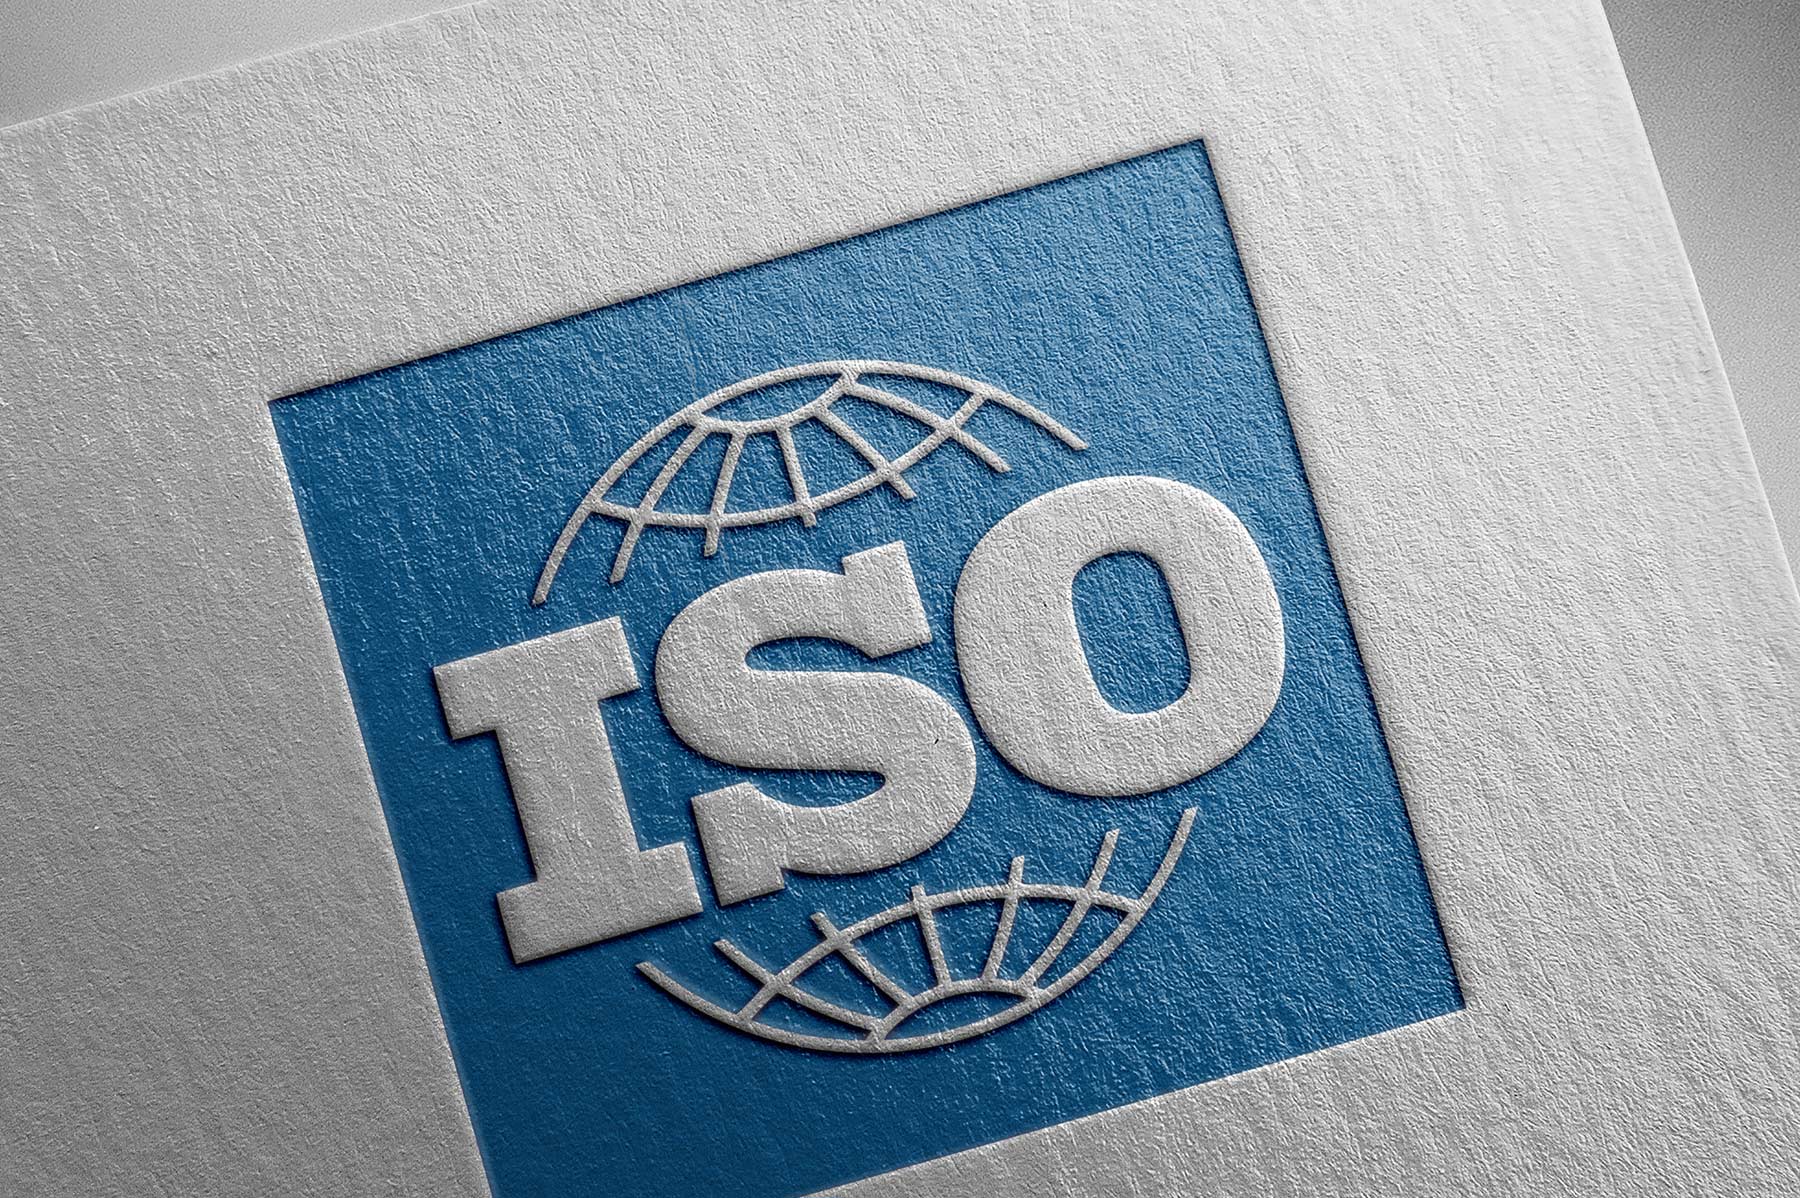 ISO 14001 – the International Standard for Environment Management Systems